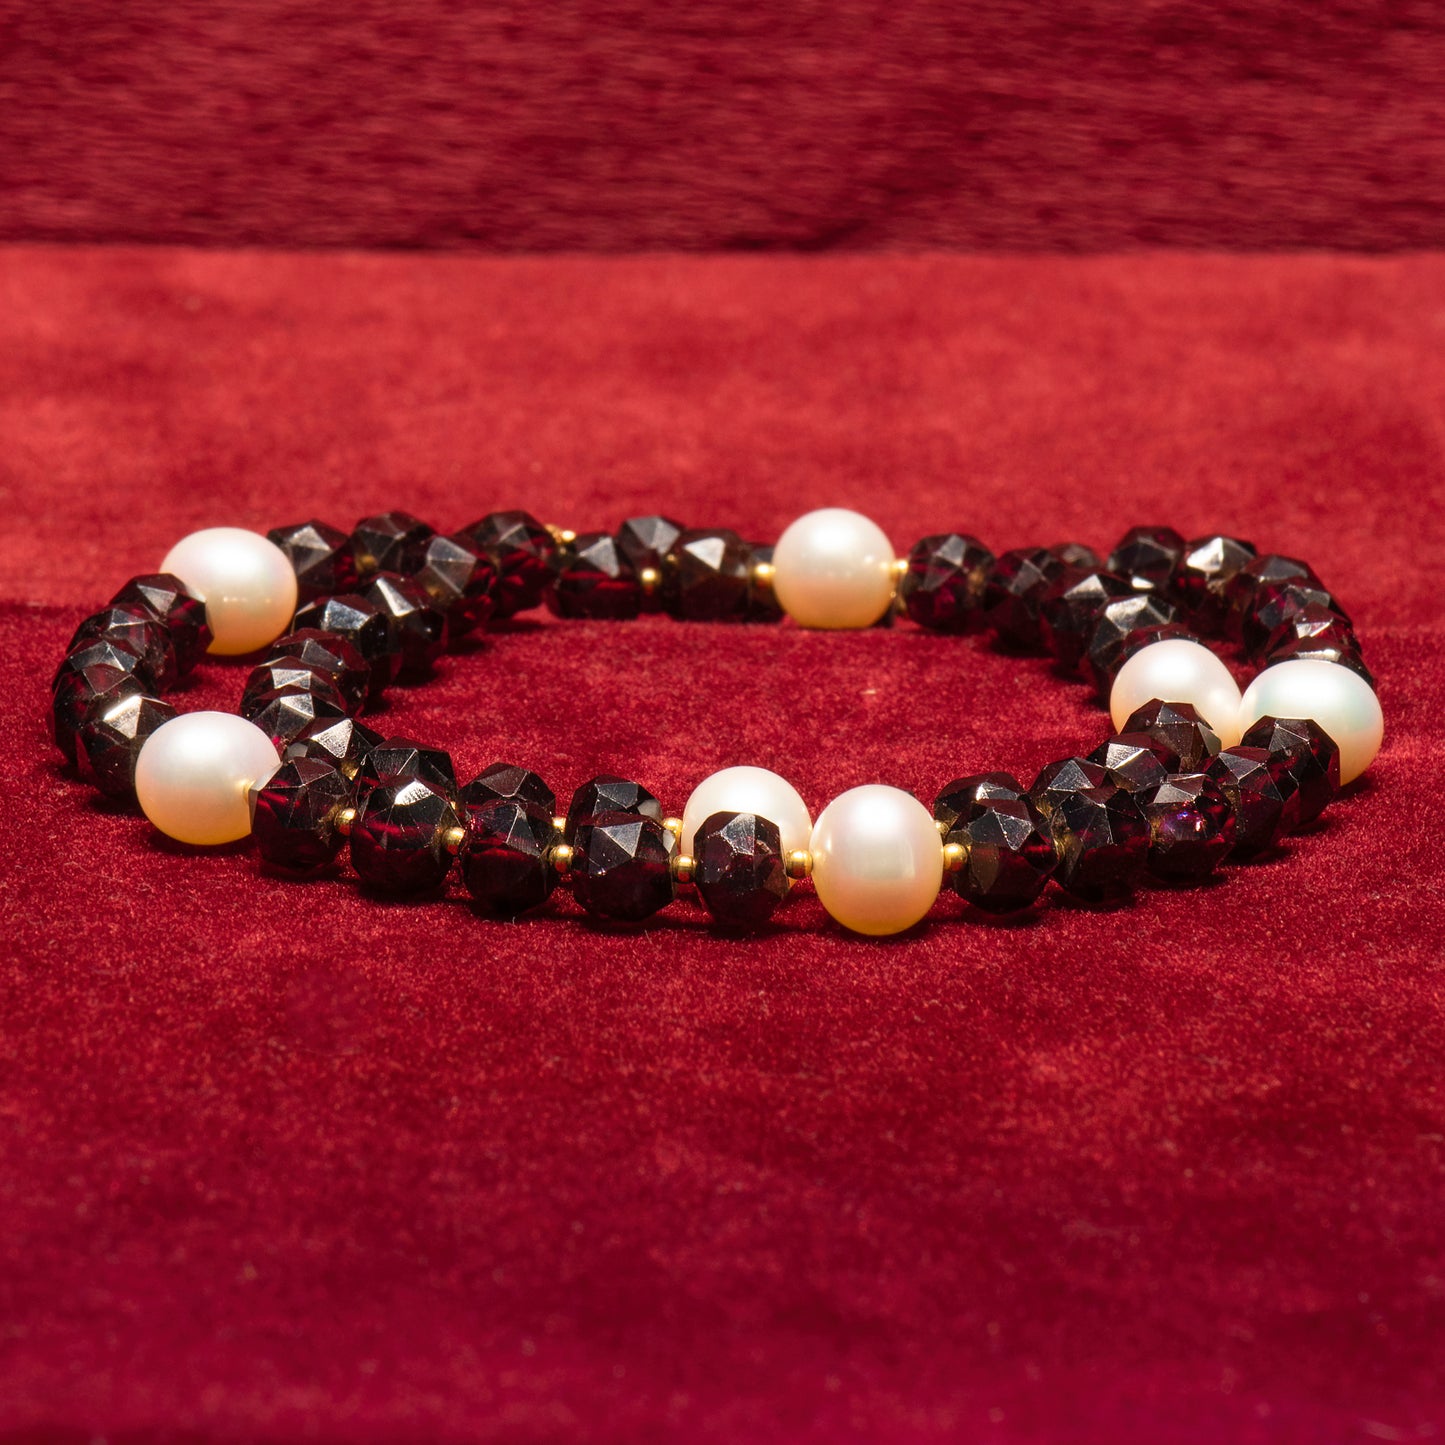 Garnets,pearls and 18K gold necklace